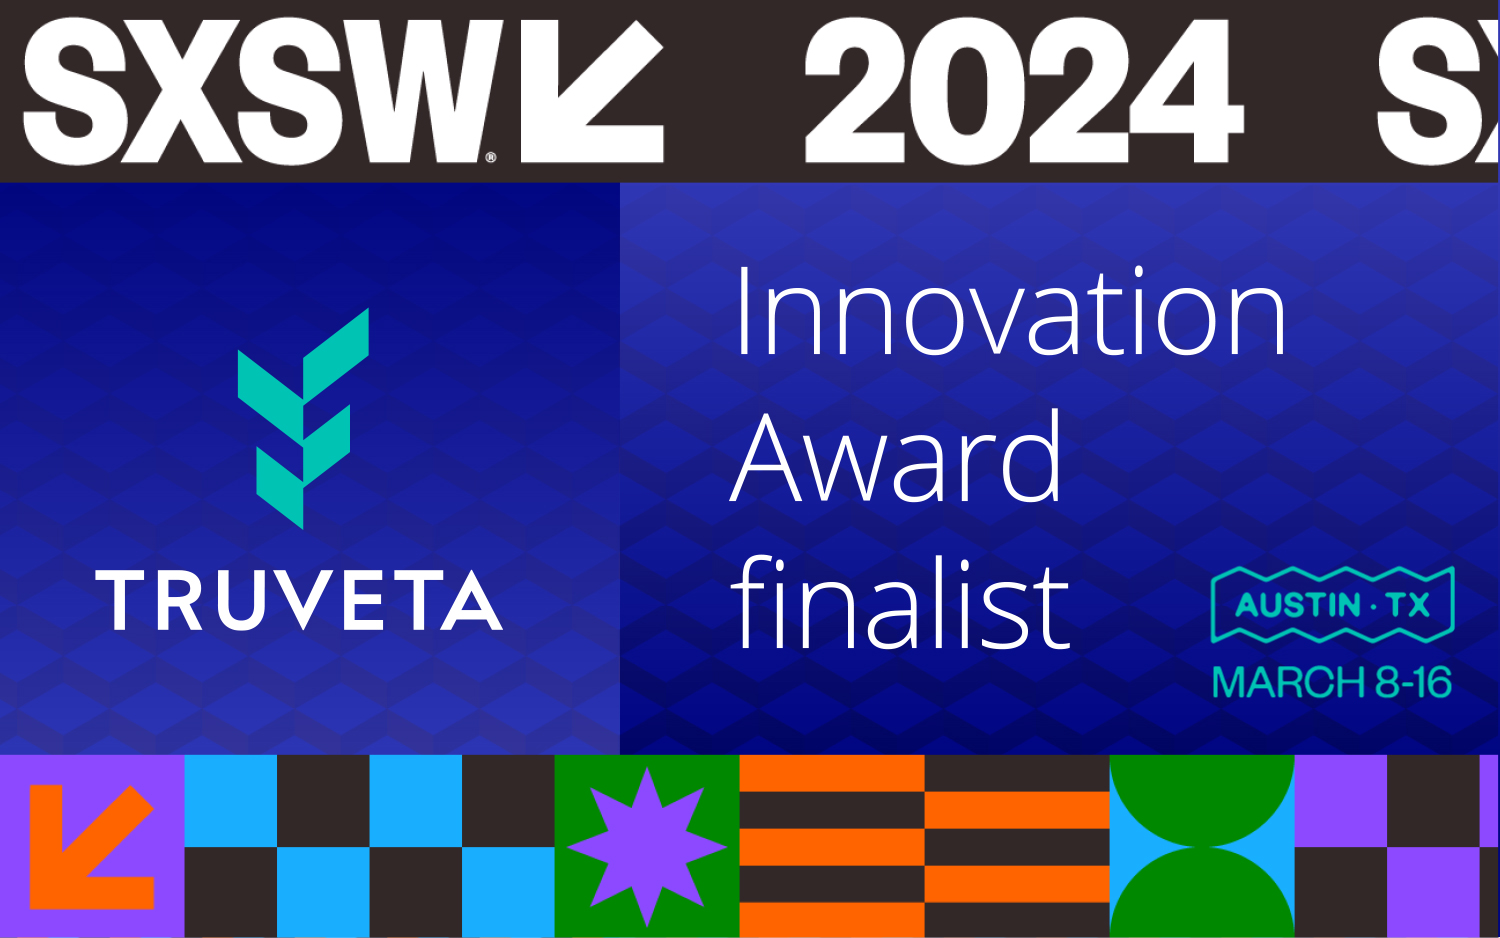 EHR data company Truveta named SXSW Innovation Award Finalist in AI category for AI-enabled health research